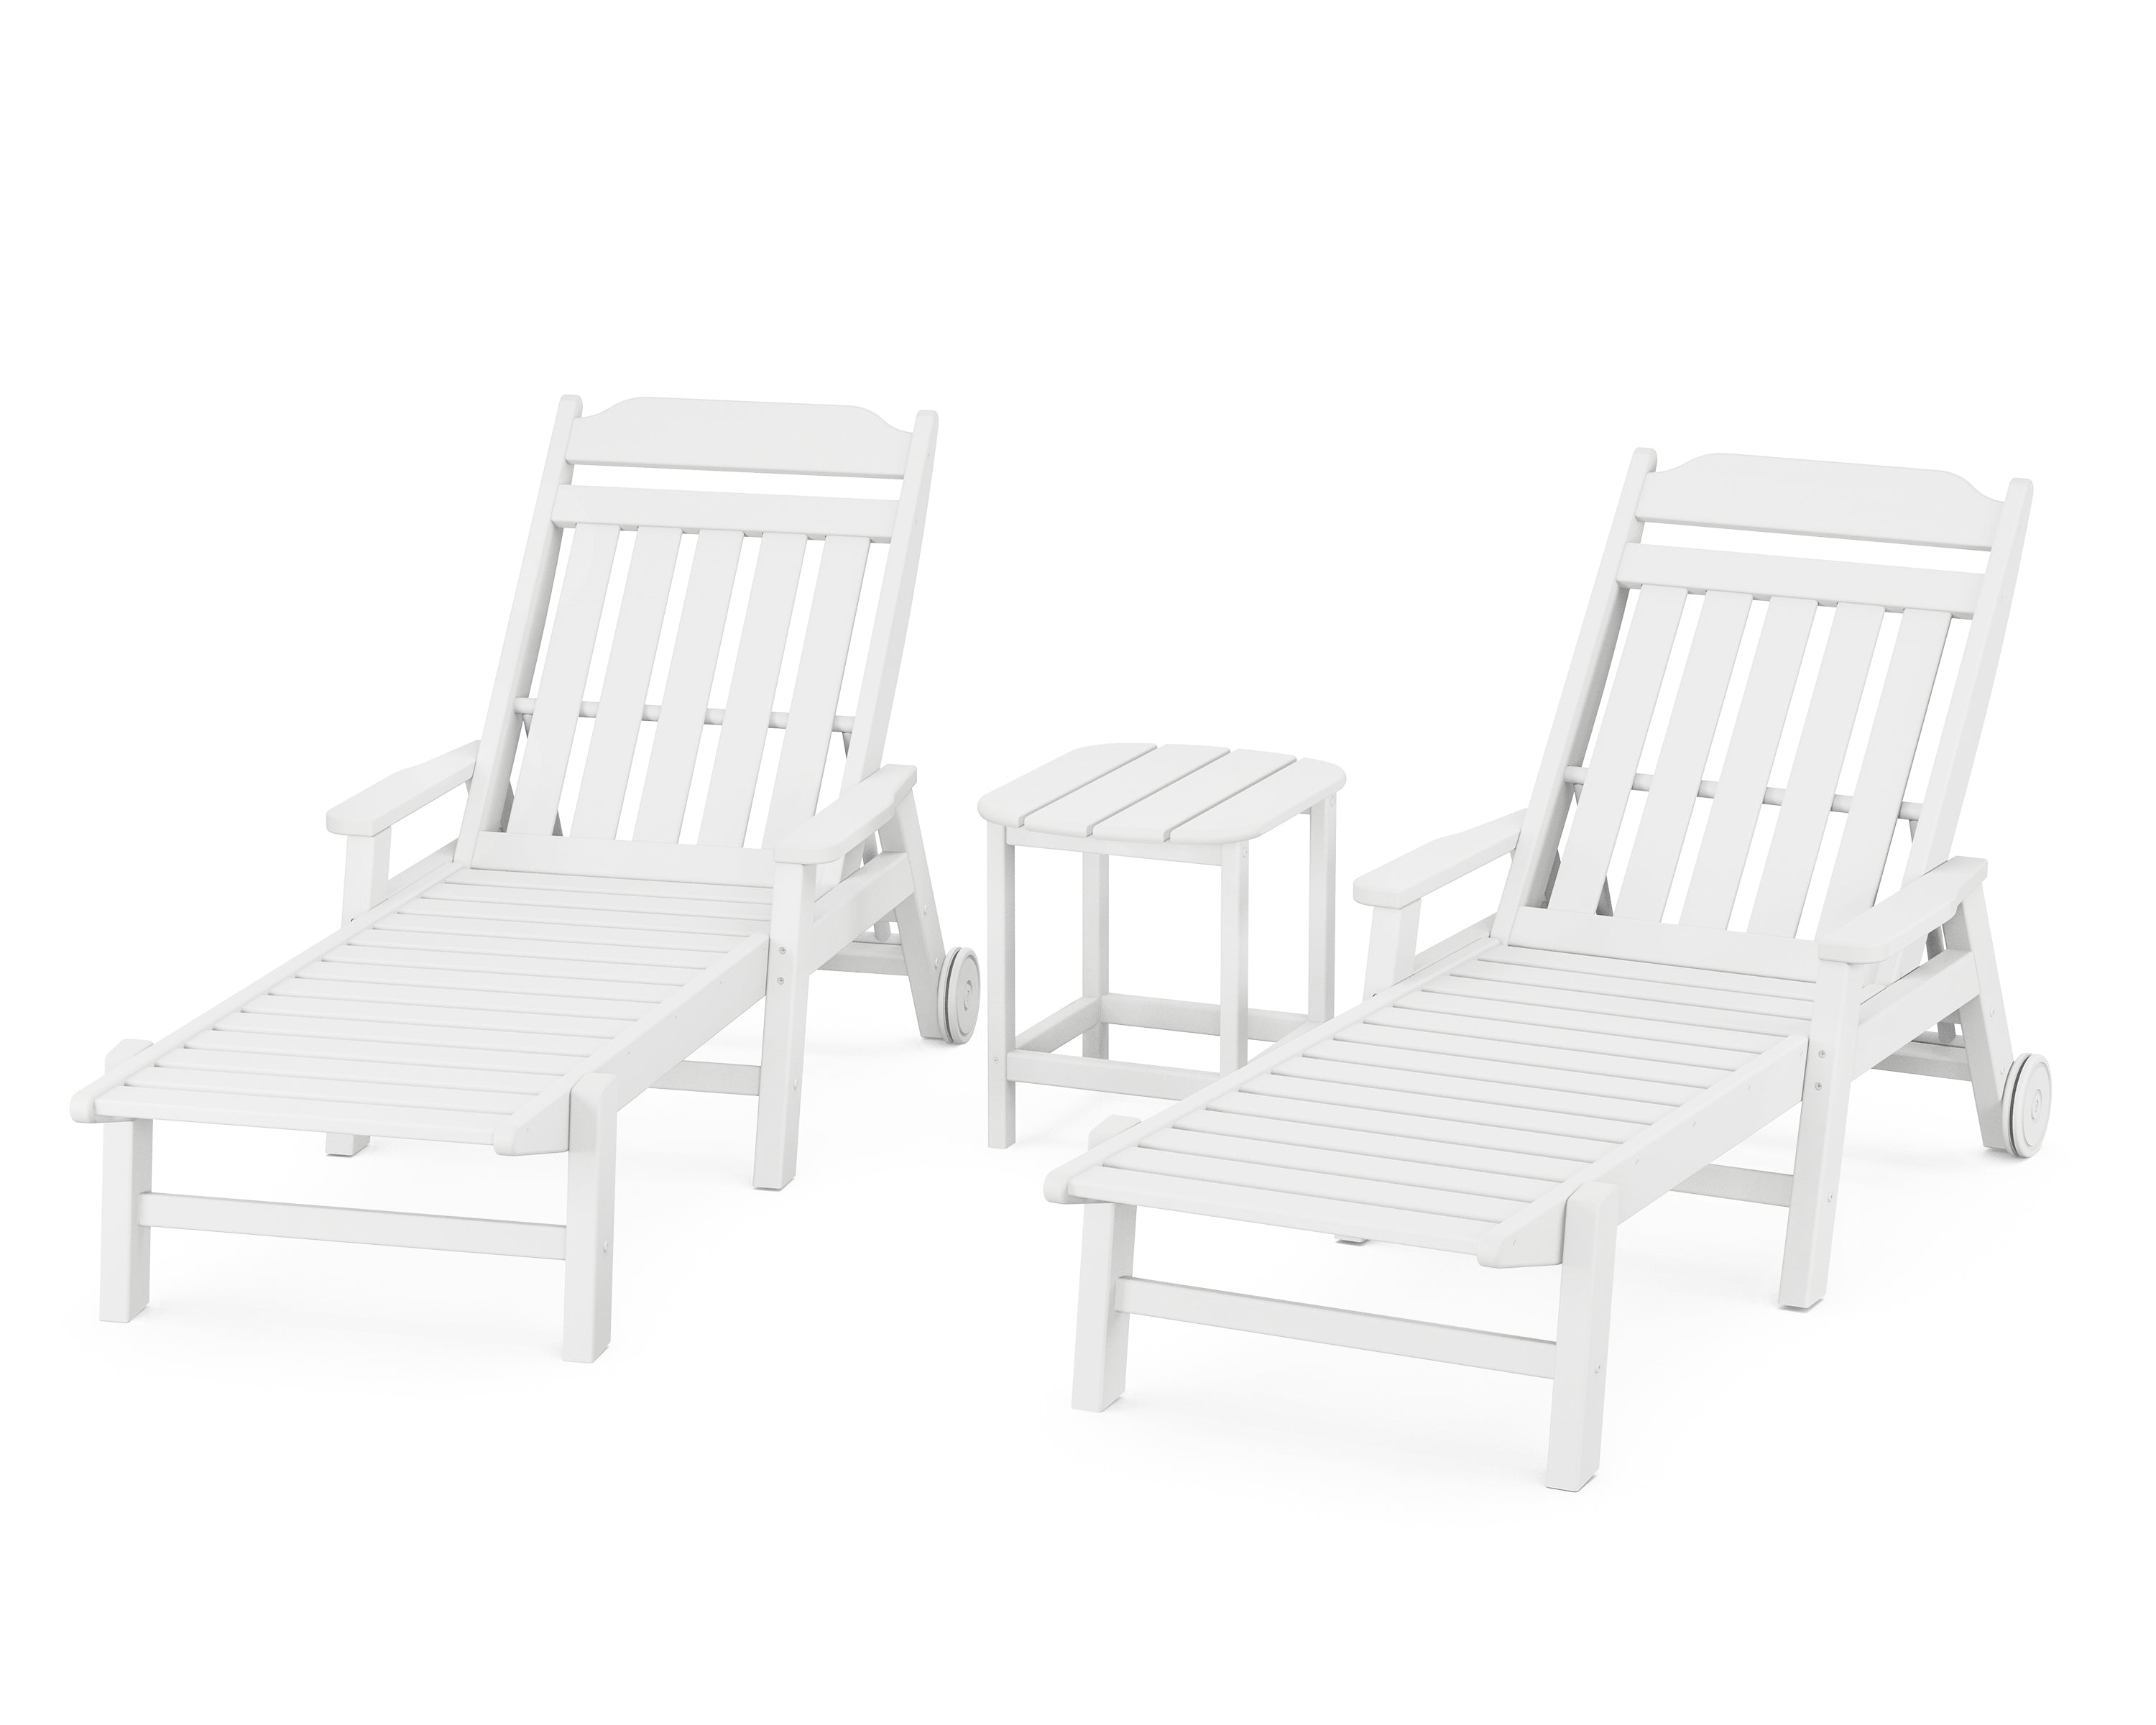 POLYWOOD Country Living 3-Piece Chaise Set with Arms and Wheels in White